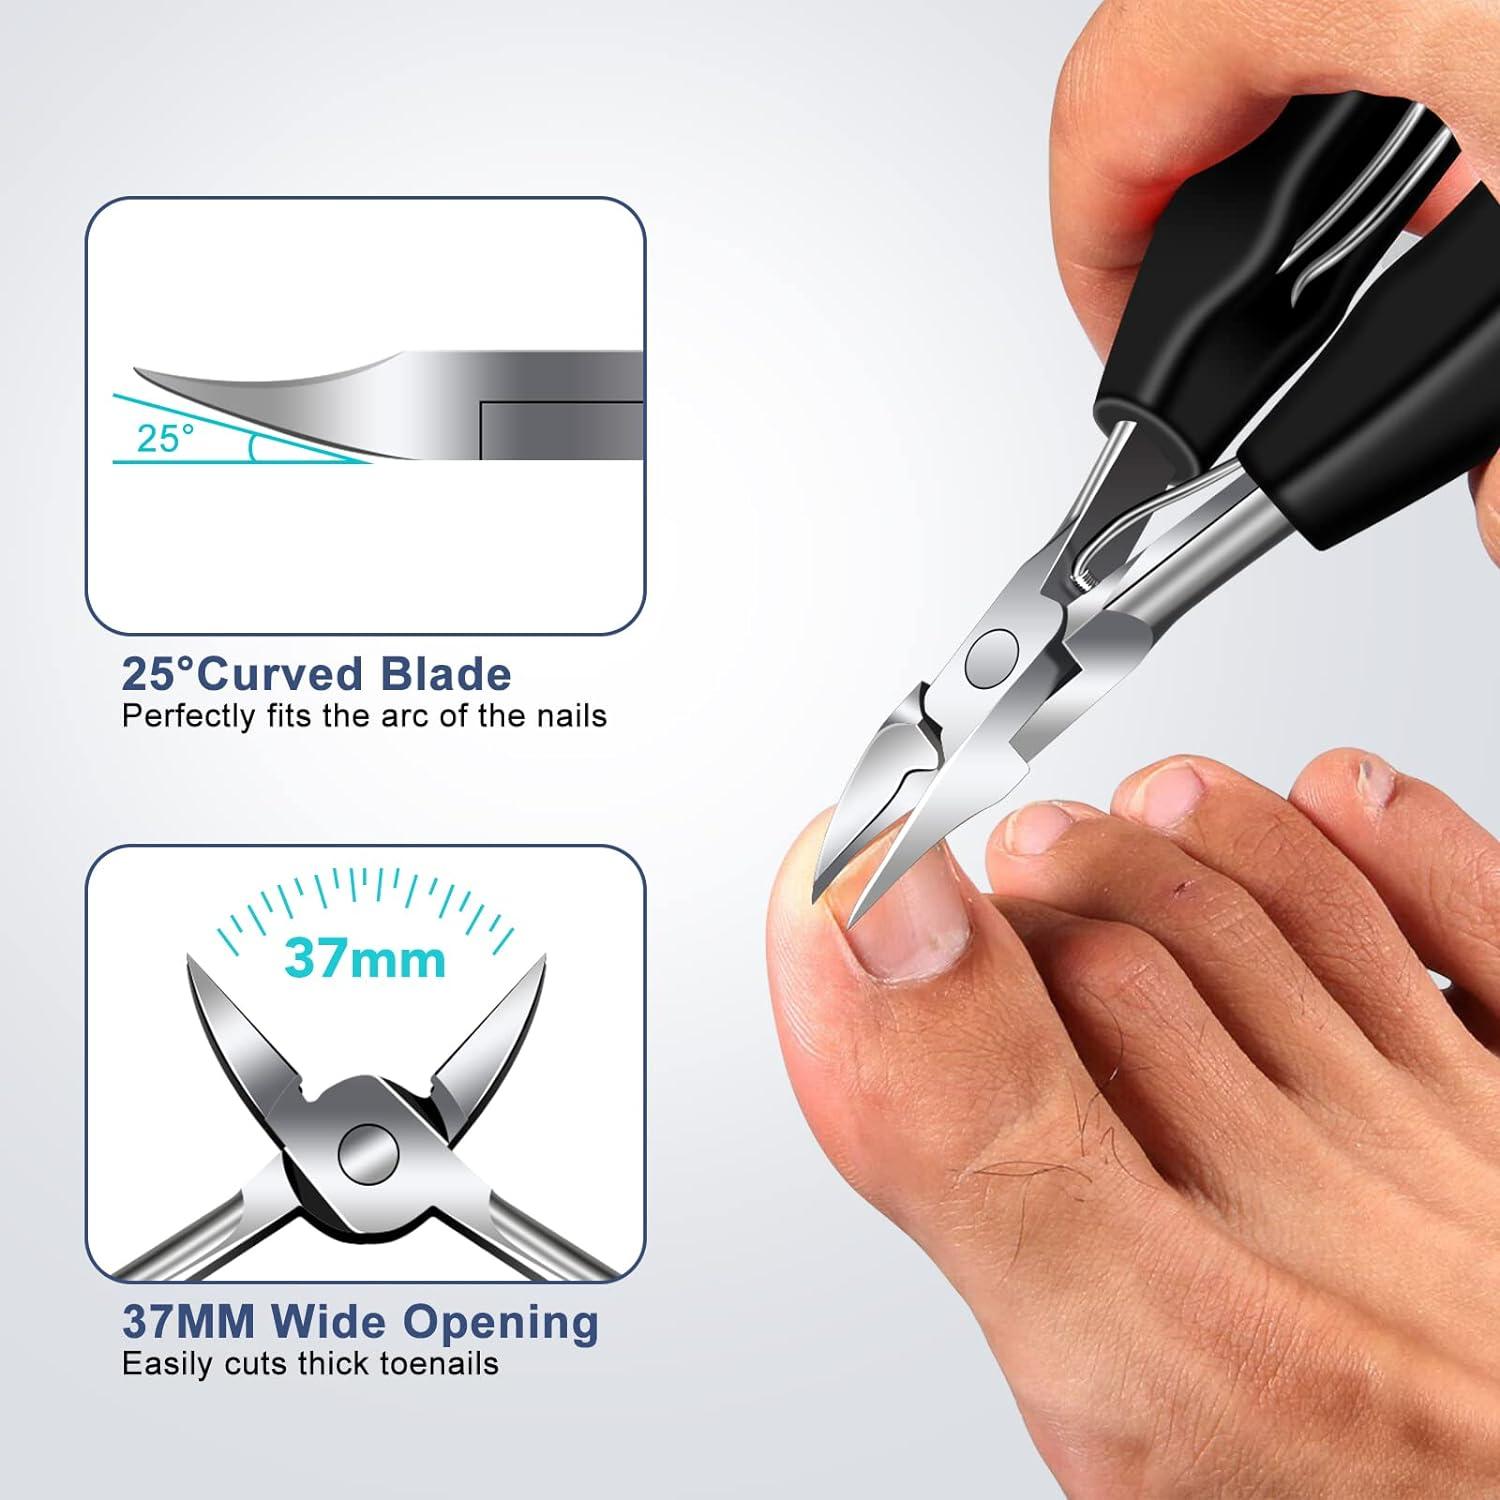 BlisterPod Toenail Clippers For Thick Toenails: Podiatrist Recommended -  YouTube